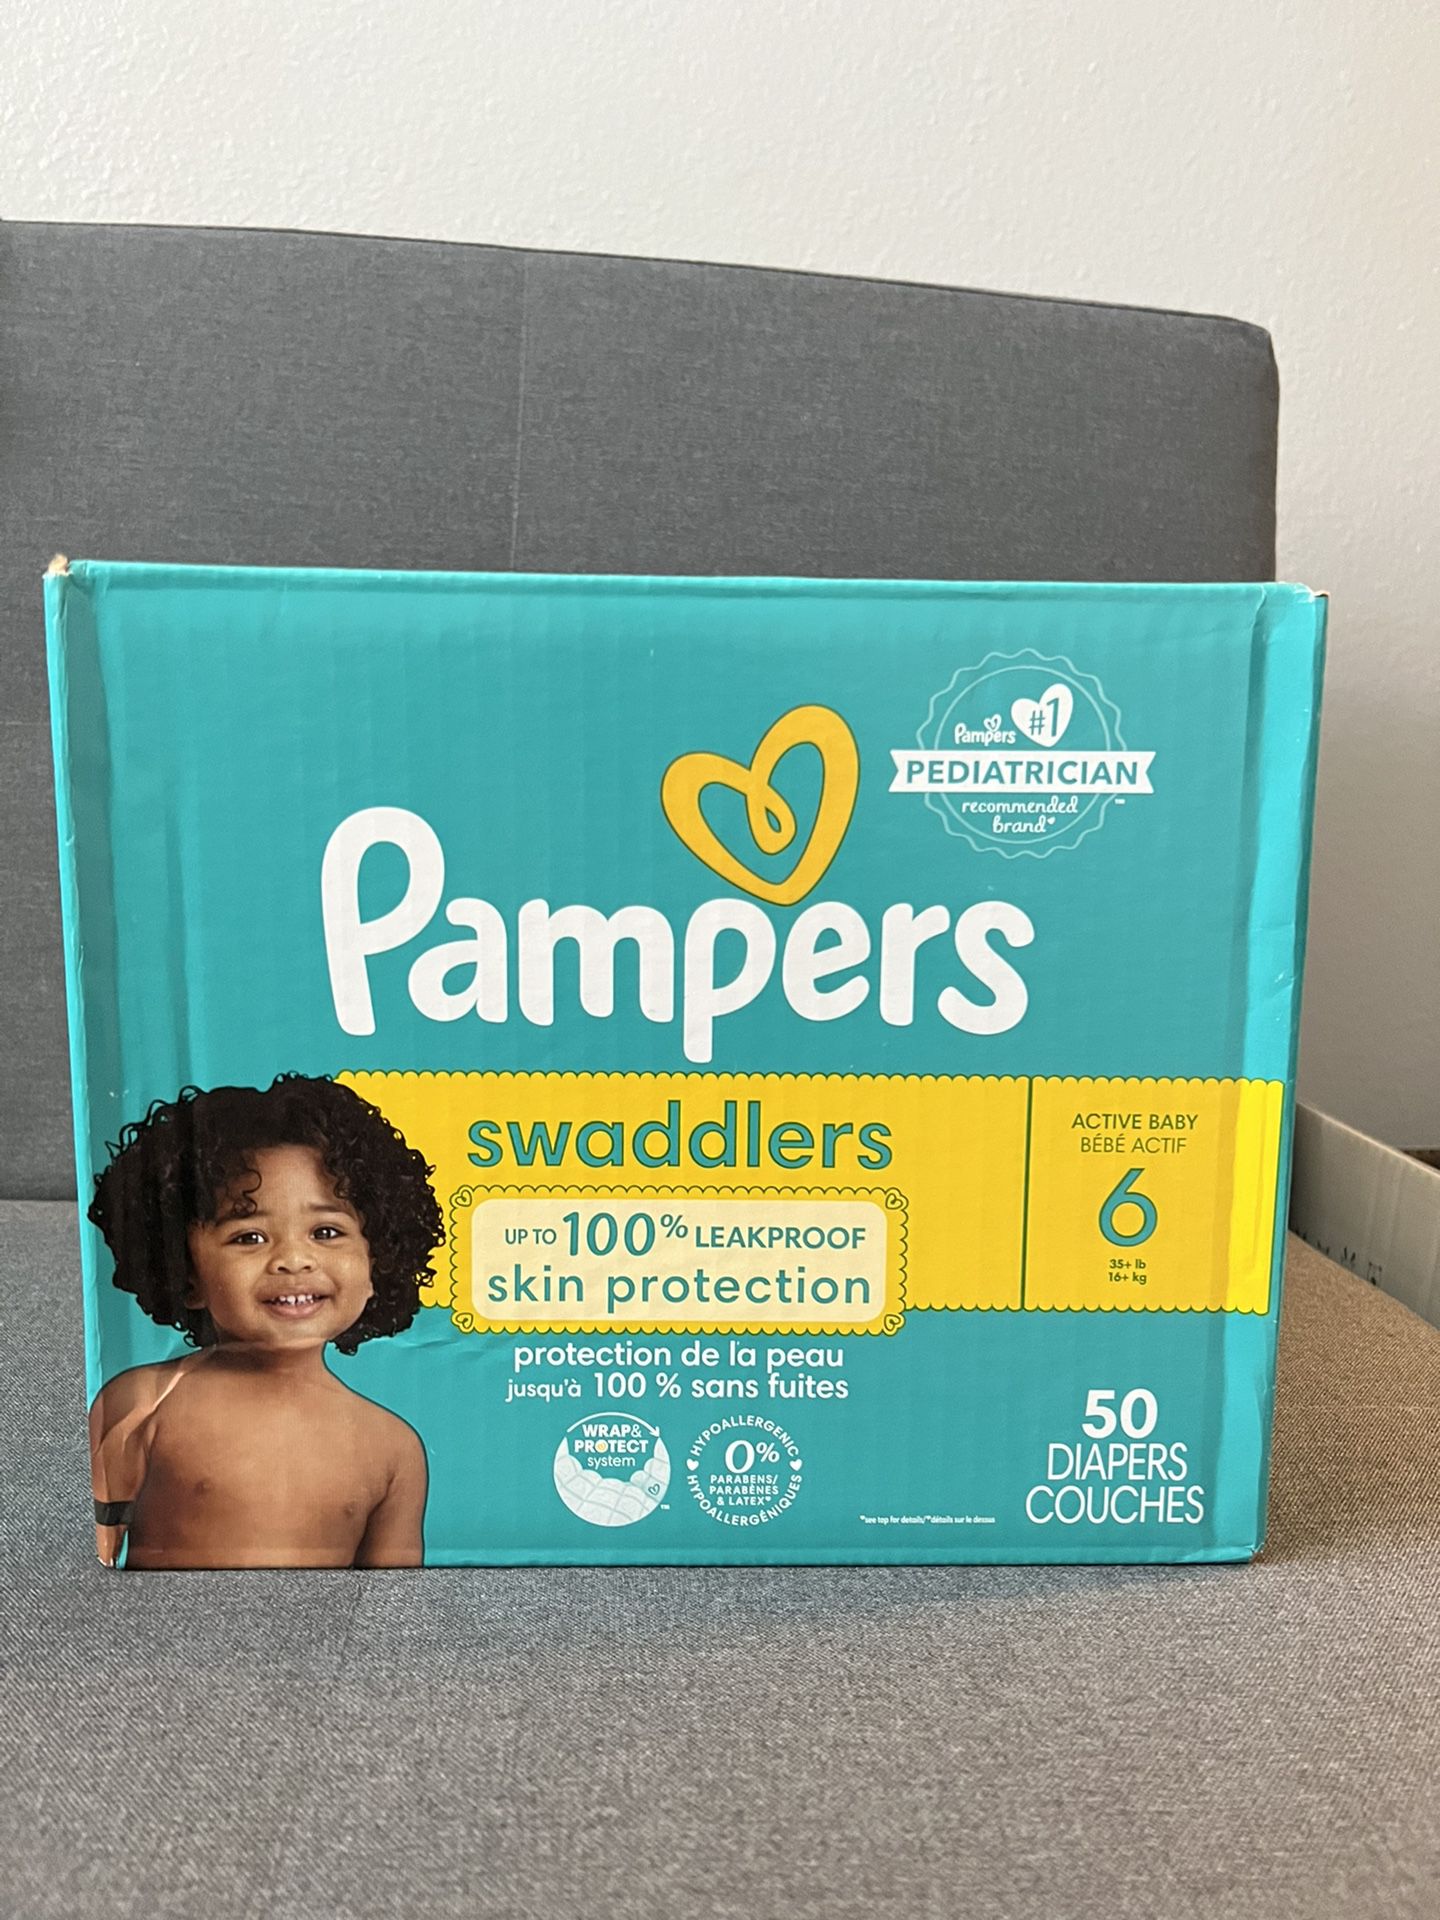 Pampers Swaddlers Size 6 —UNOPENED